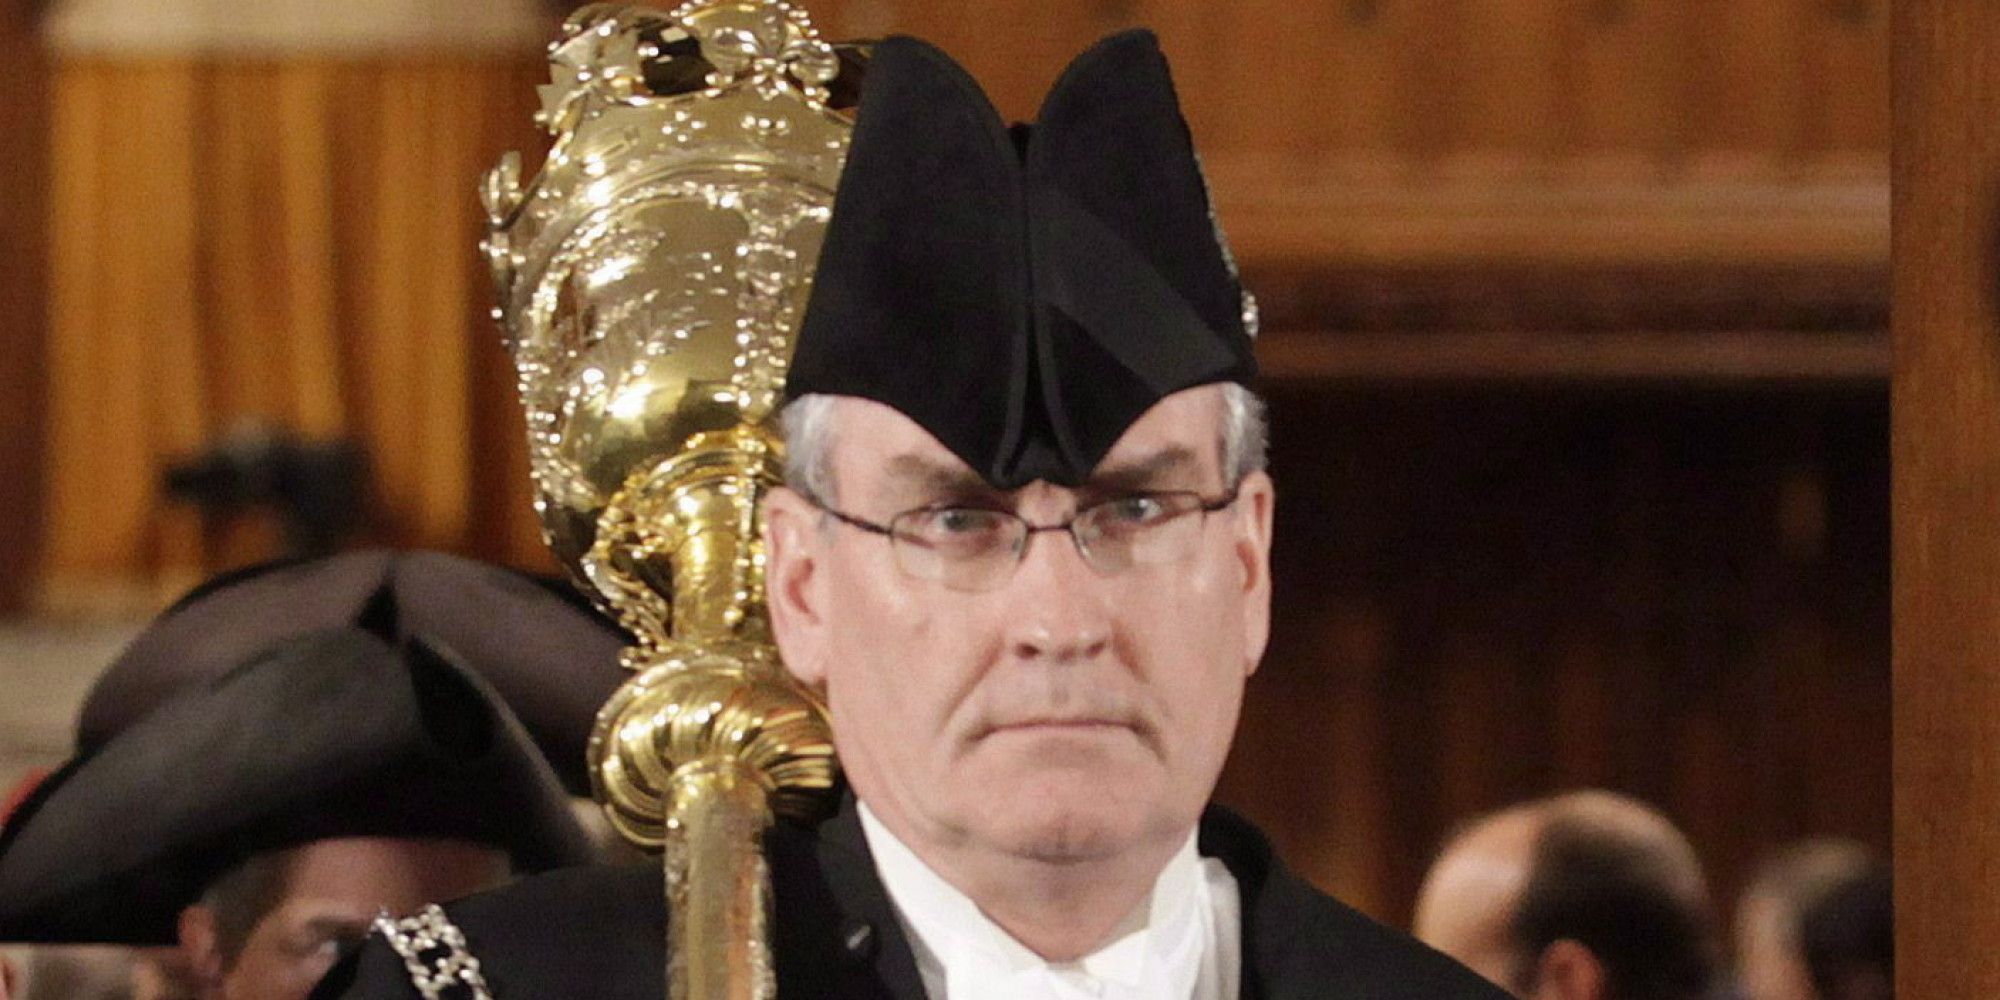 KEVIN VICKERS